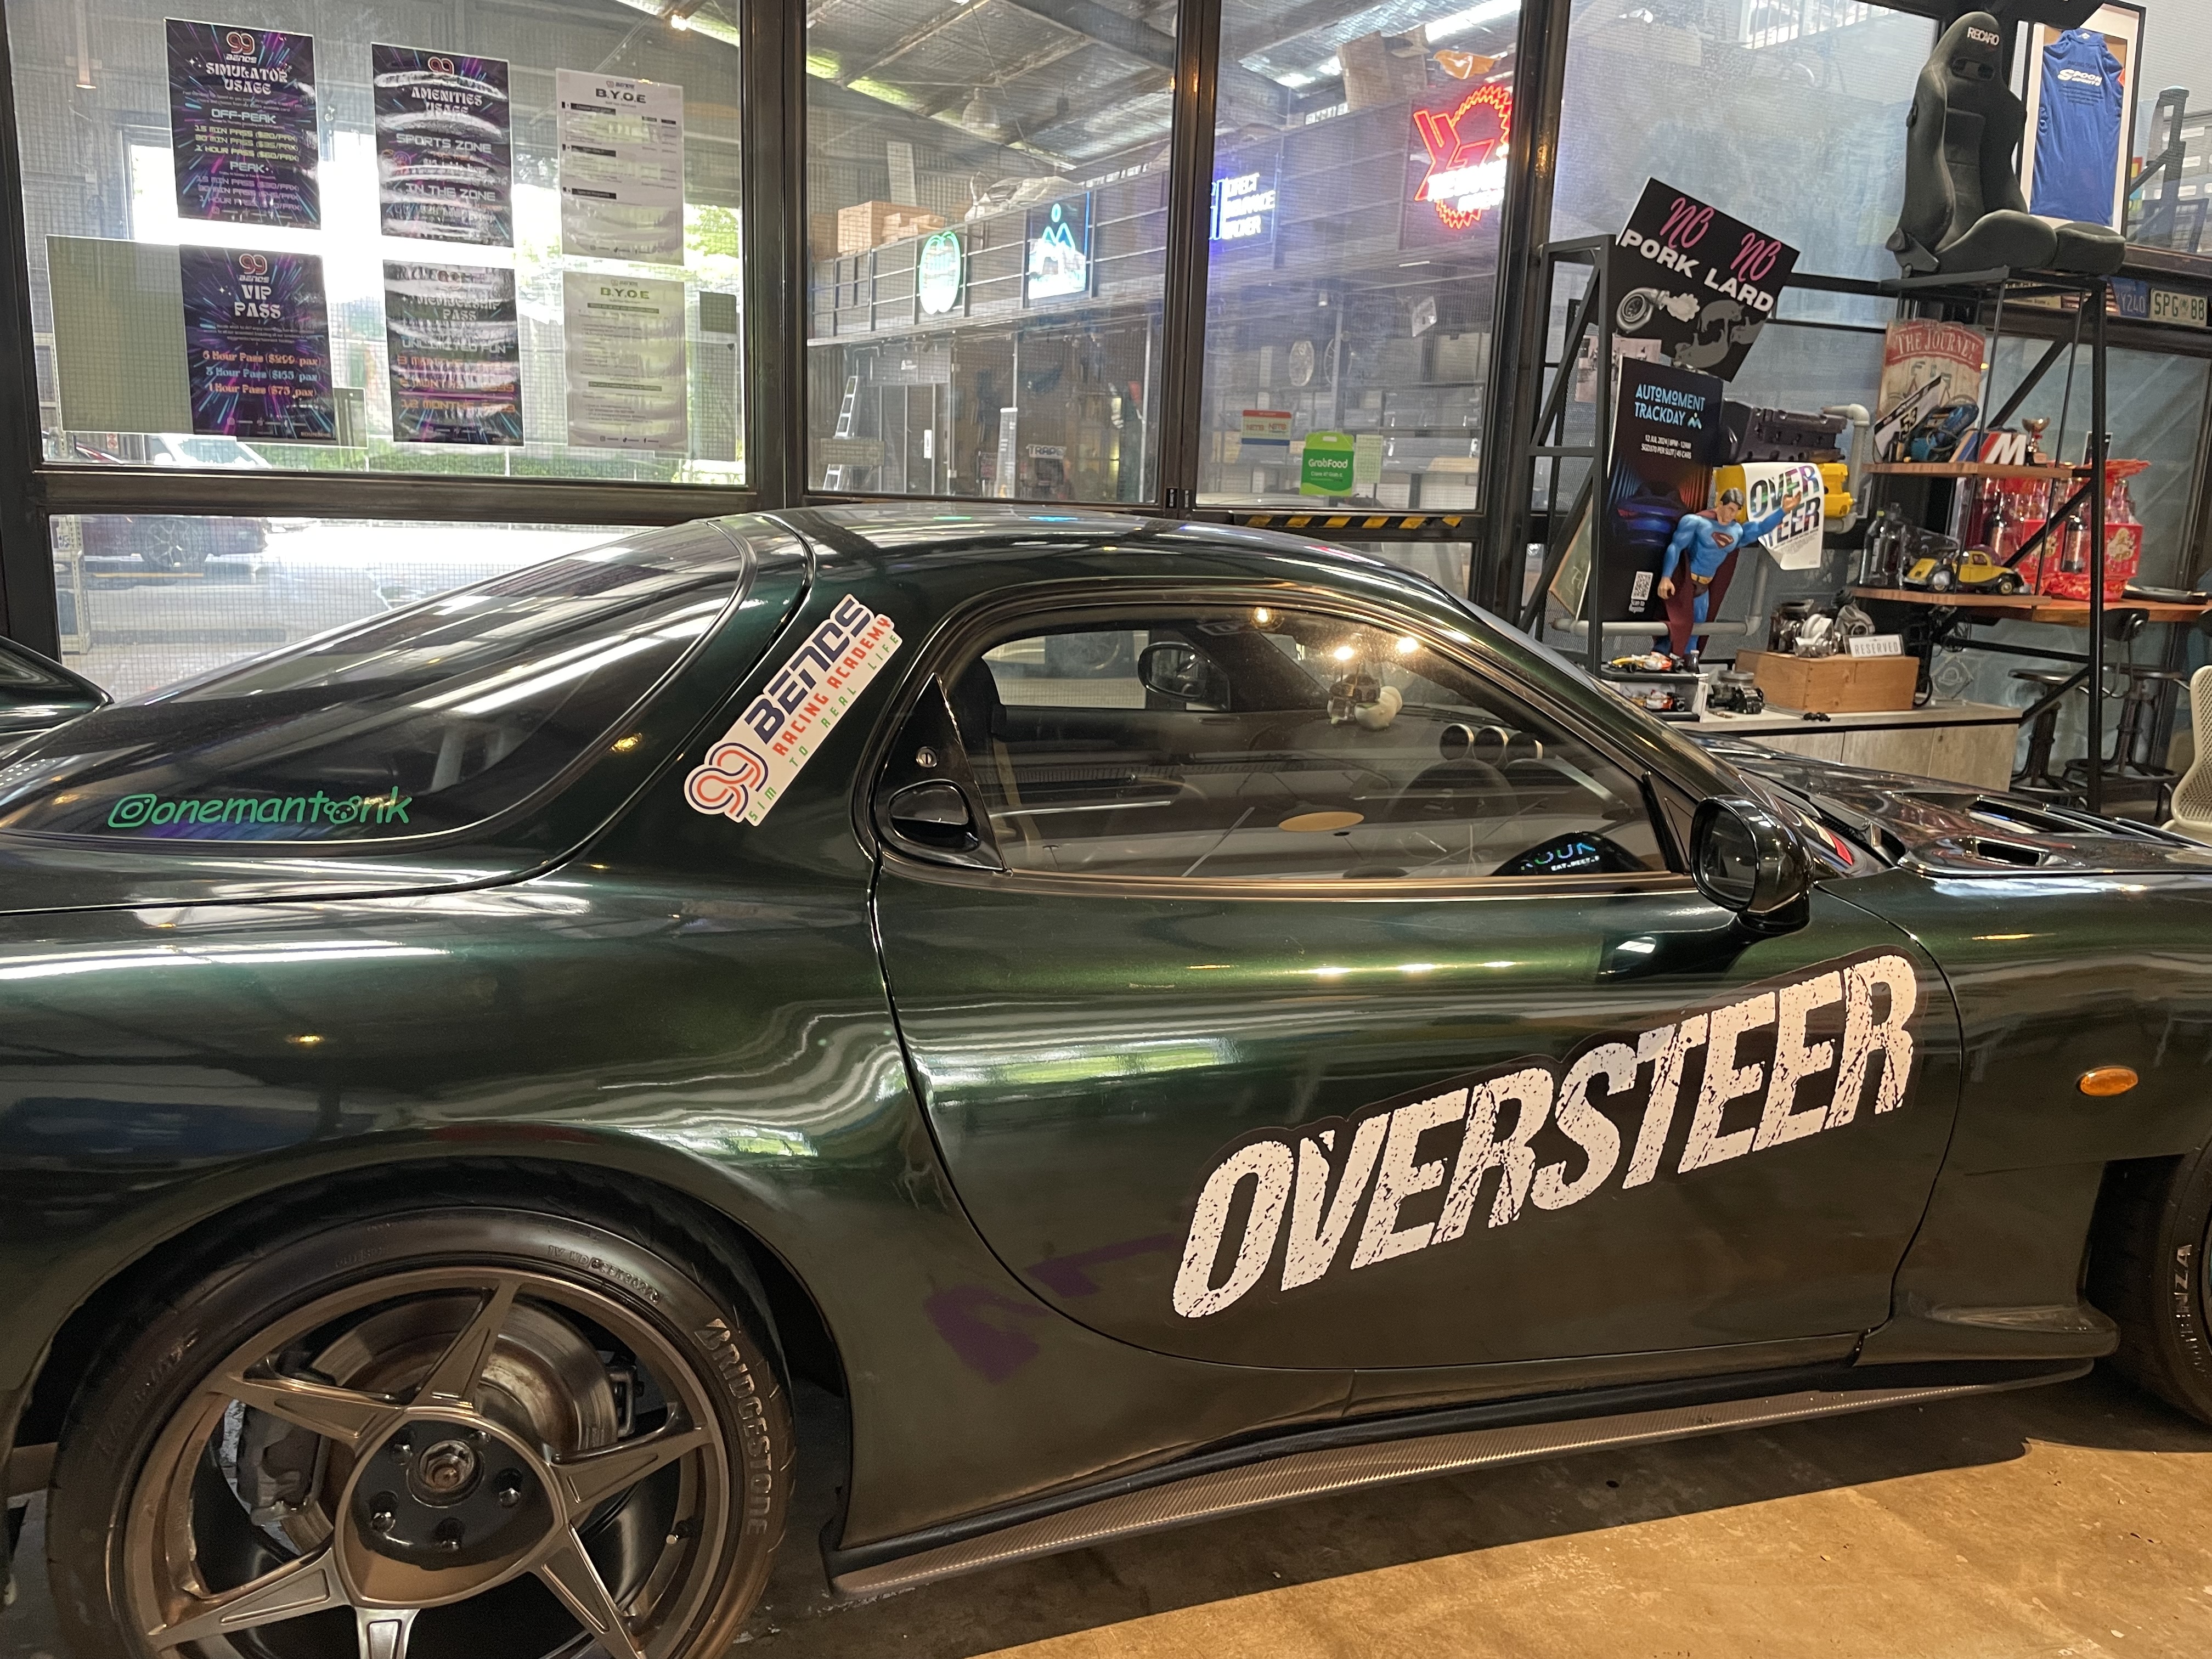 A green sports car inside Rounding with an Oversteer decal on its side.